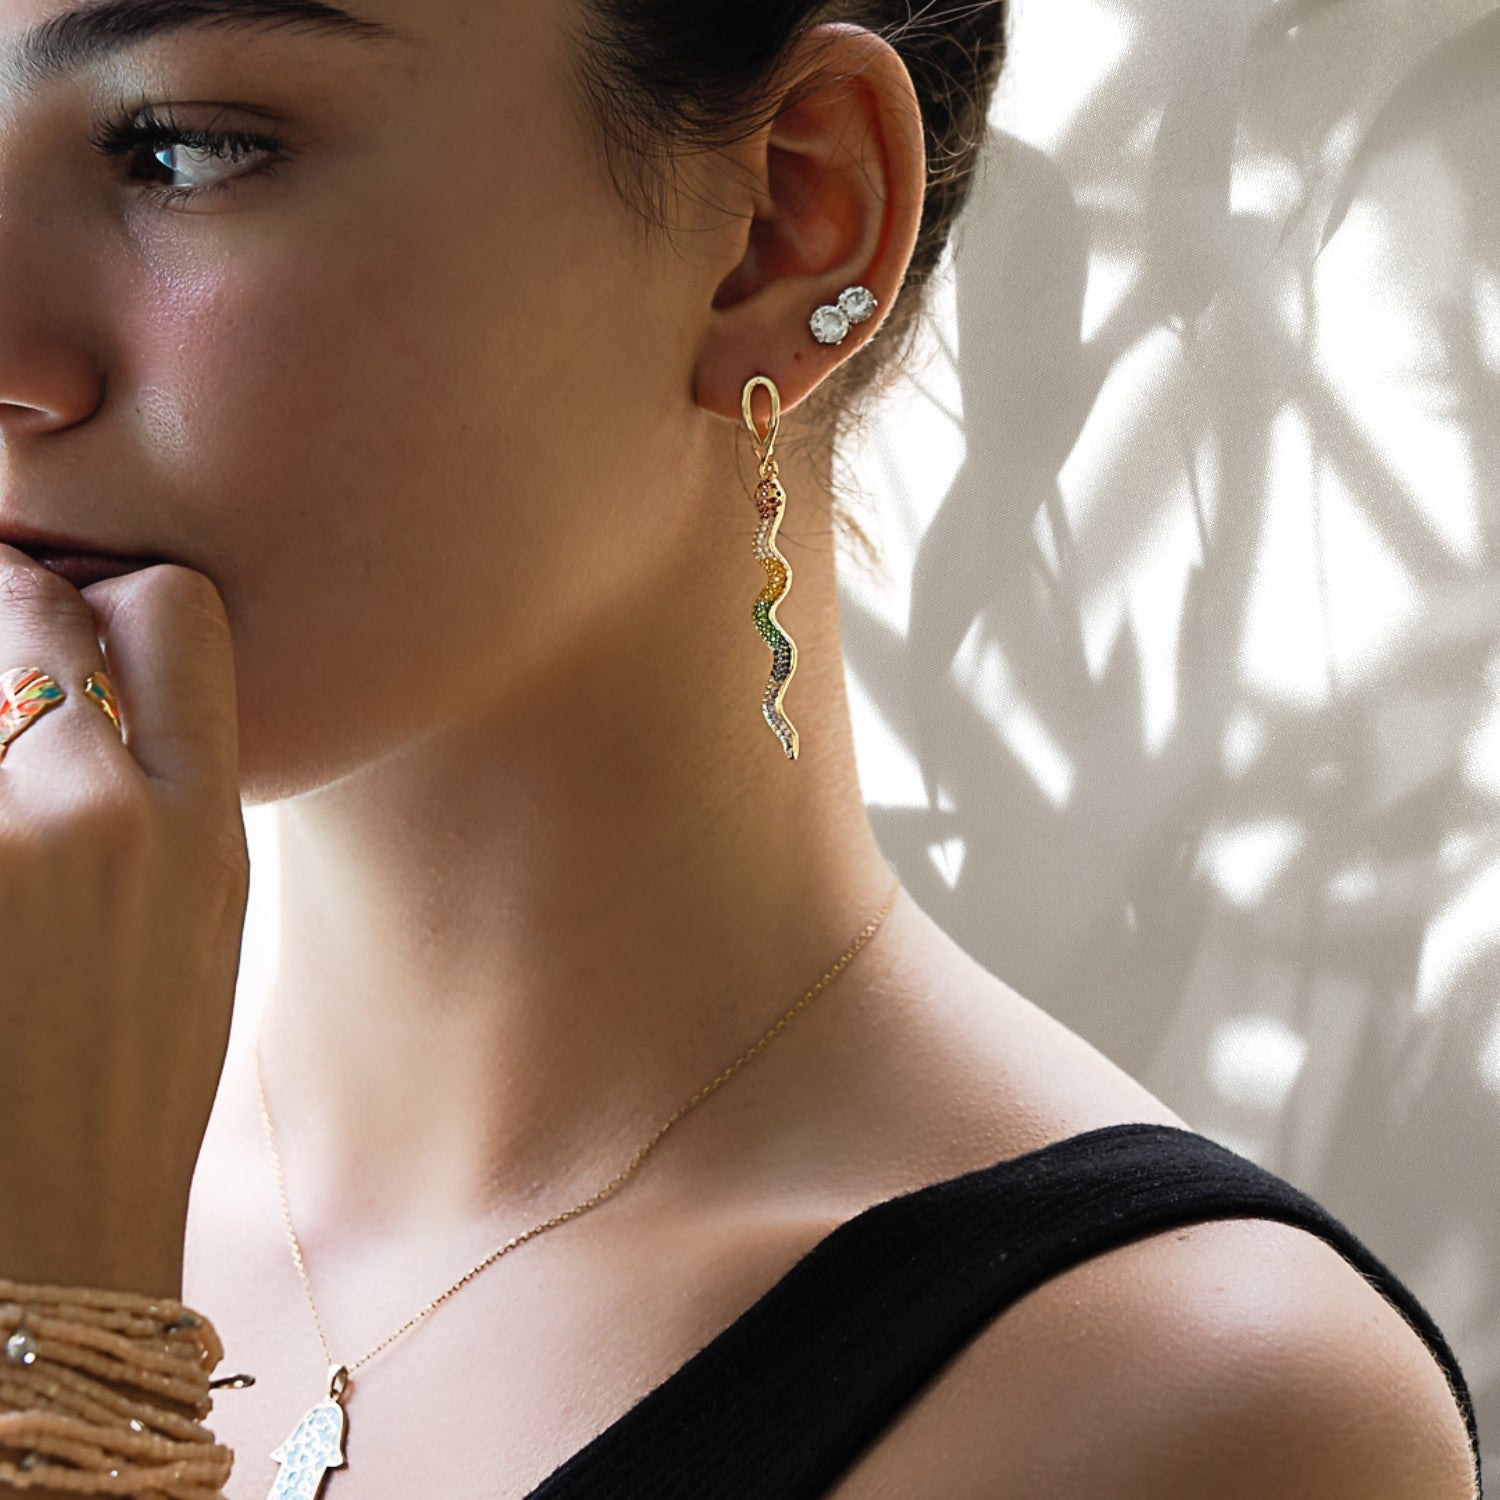 Model wearing the Cheerful Snake Earrings, highlighting their versatility and stylish look.